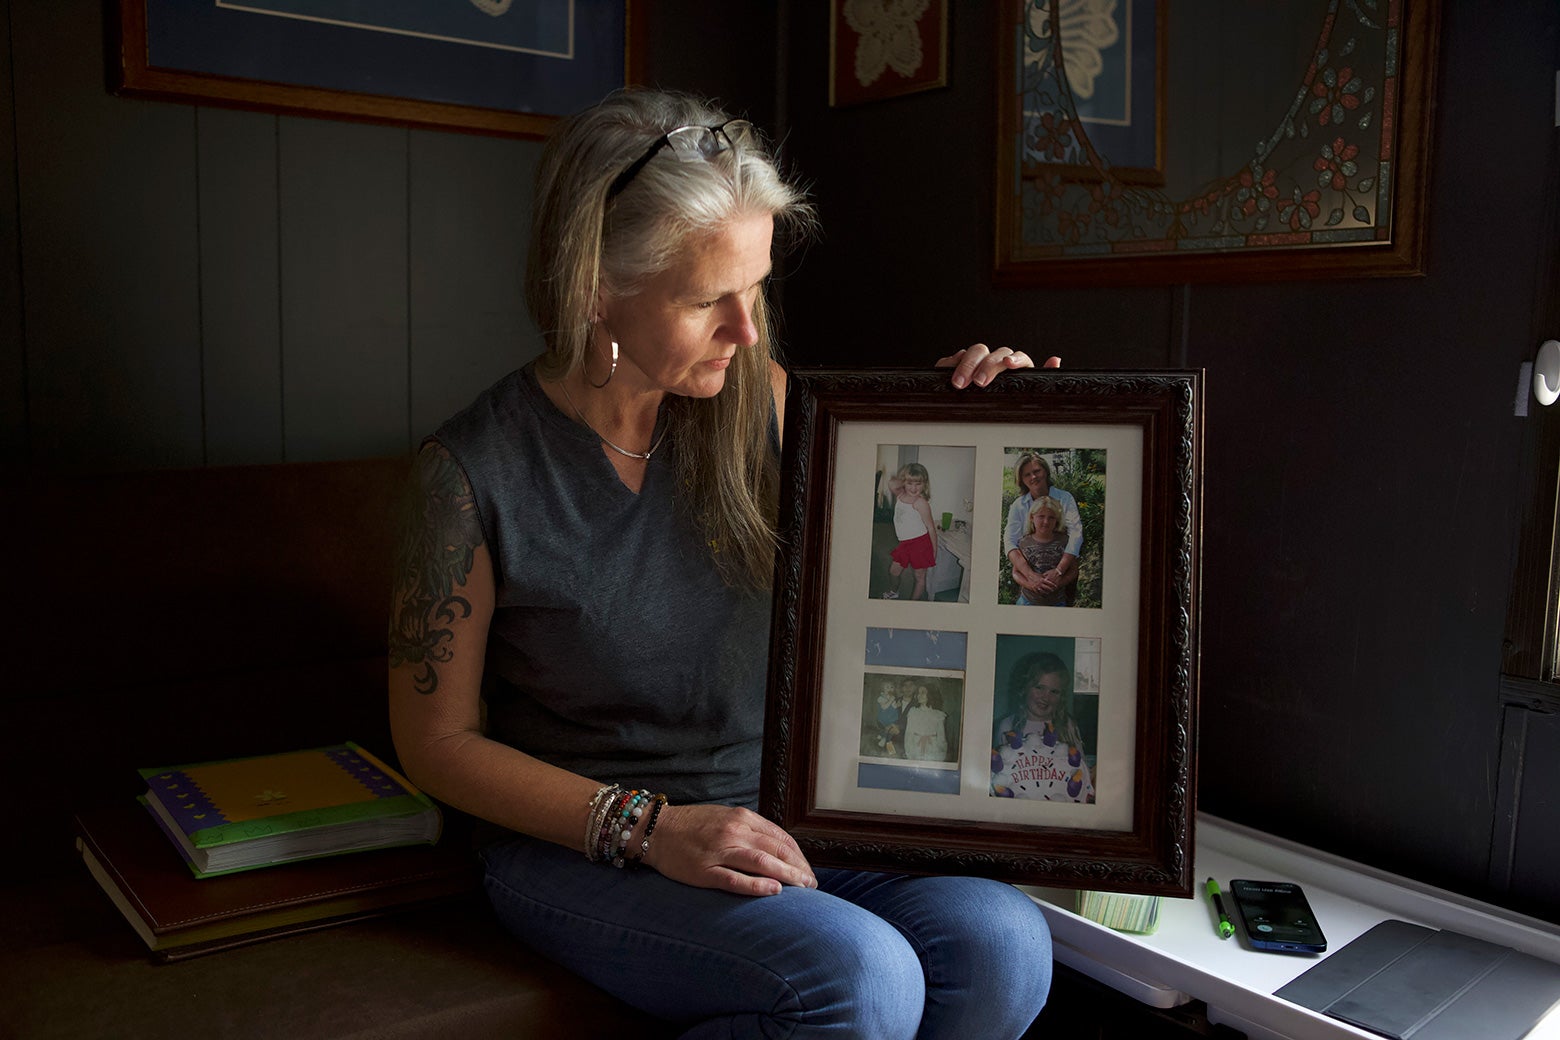 A woman with long gray hair holds up and looks at a frame of several family photos.